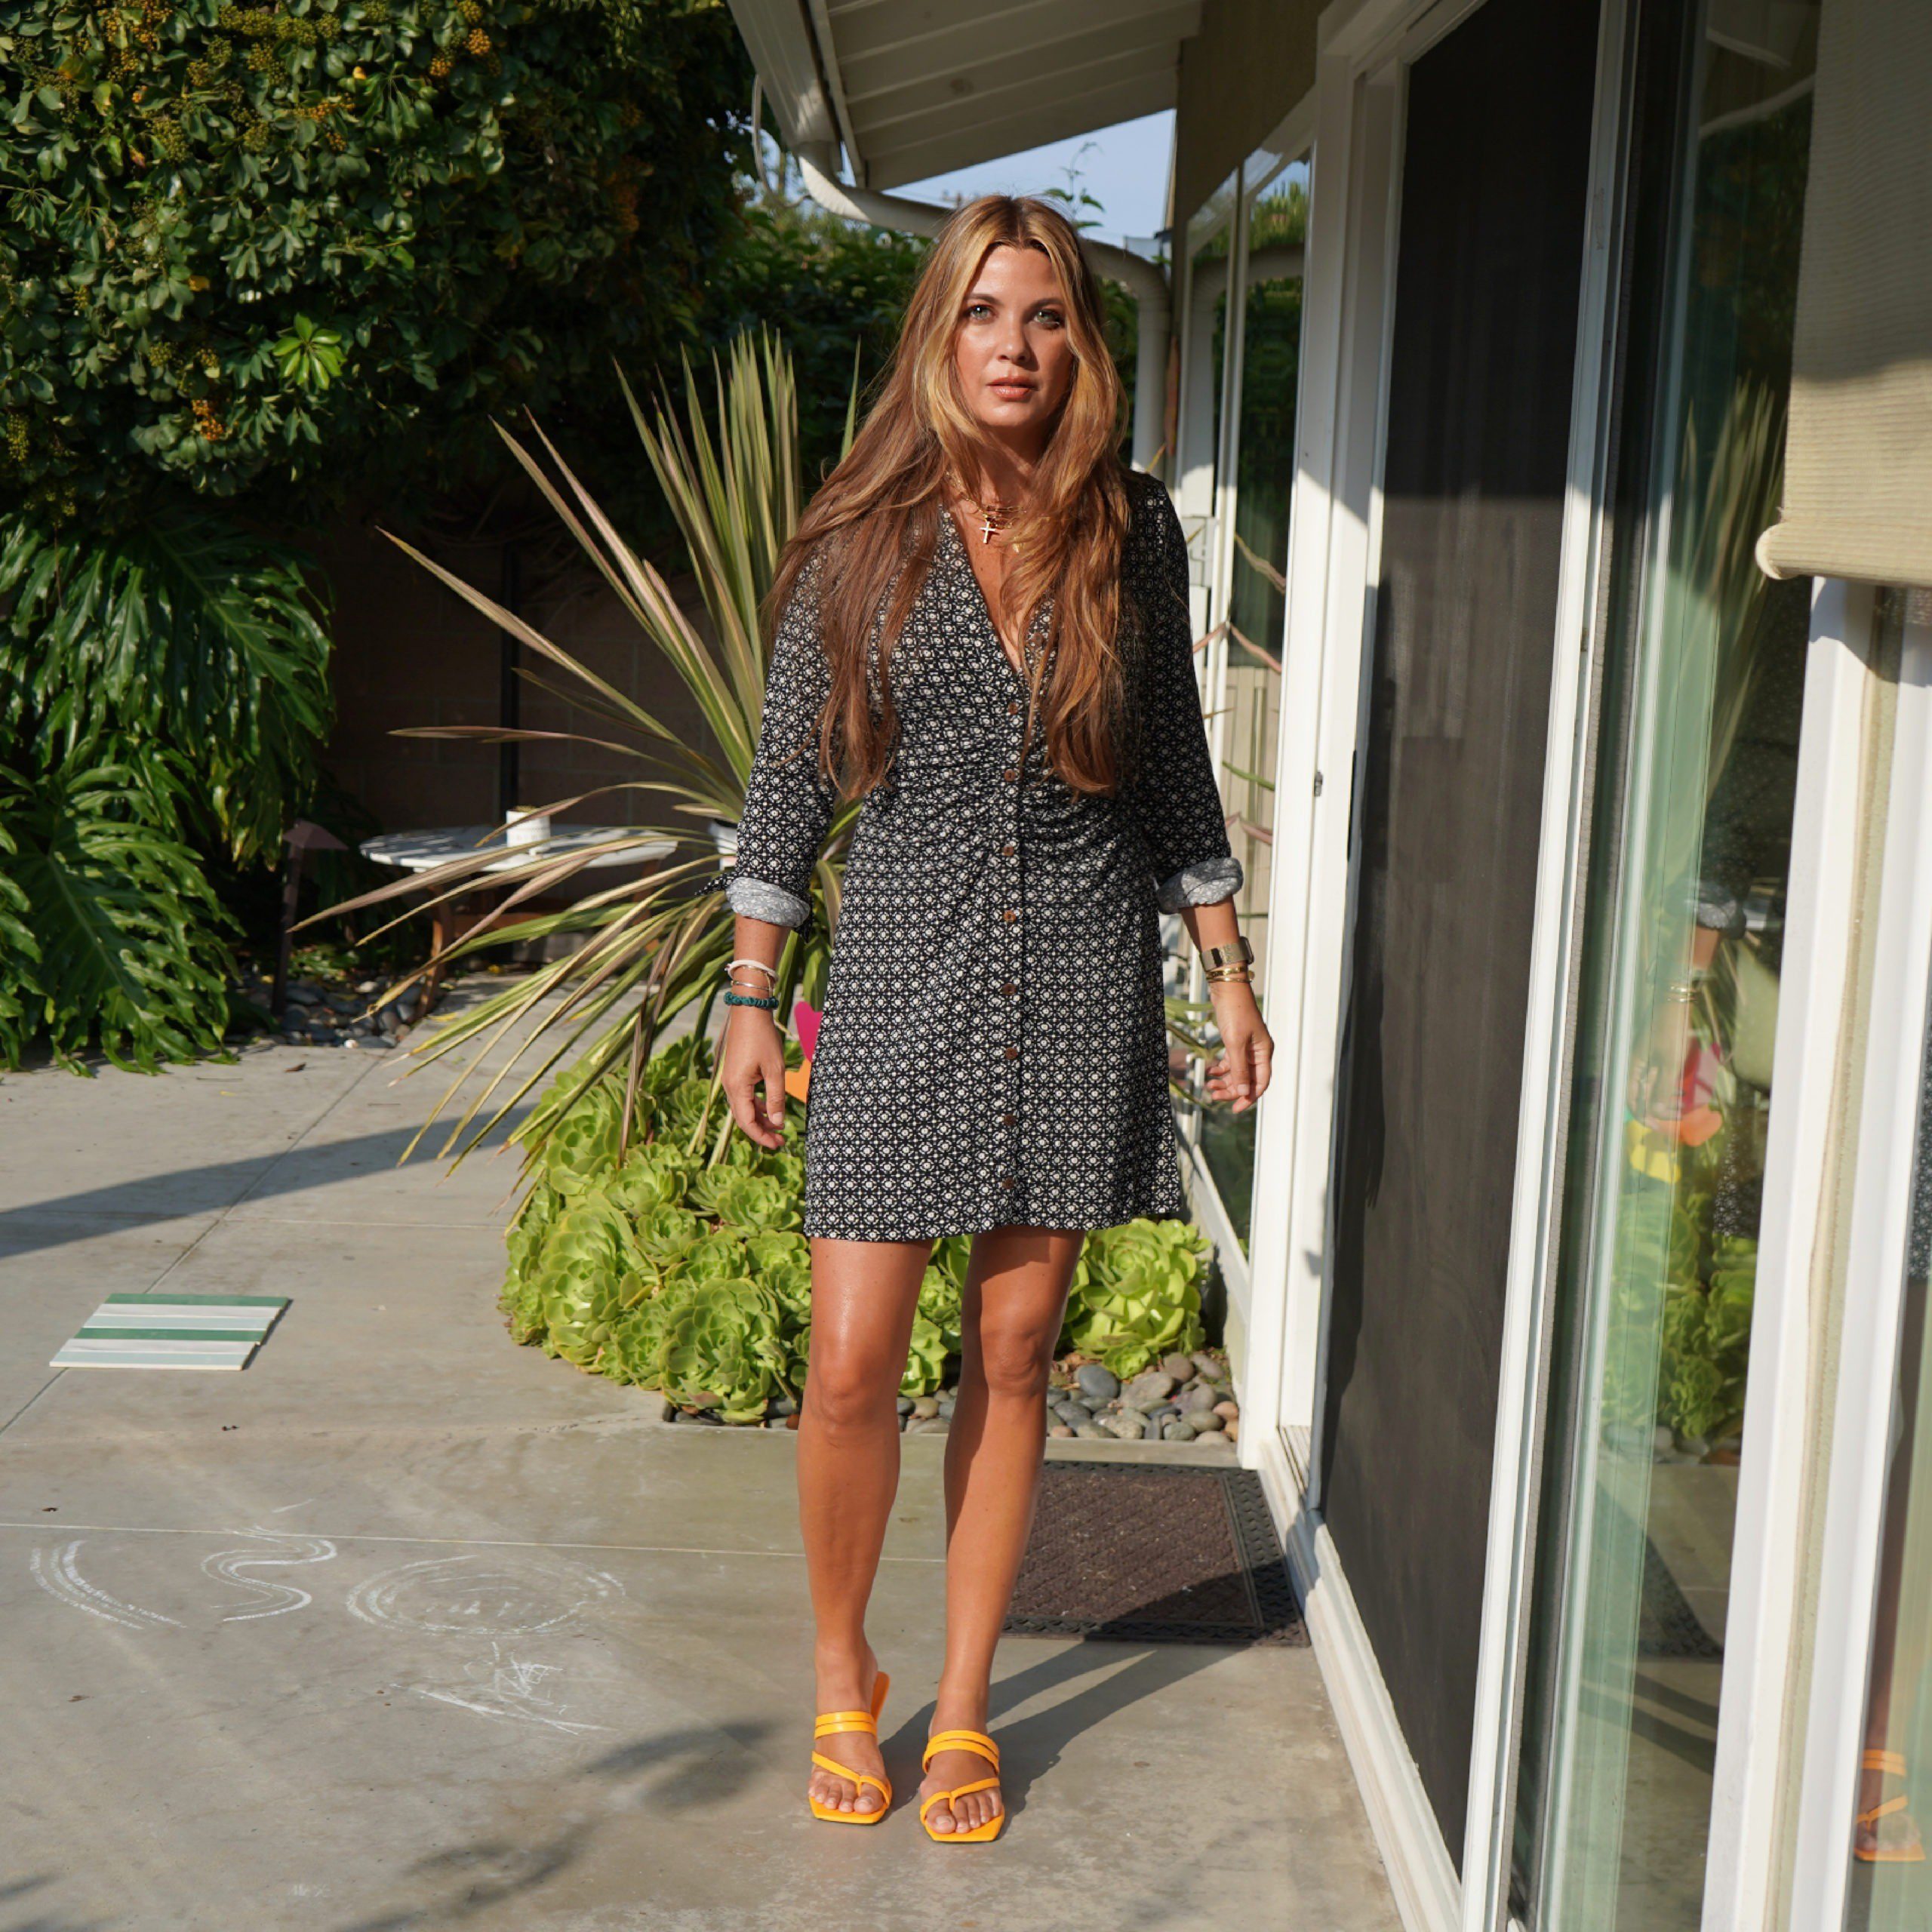 walking and wearing dress and yellow sandals